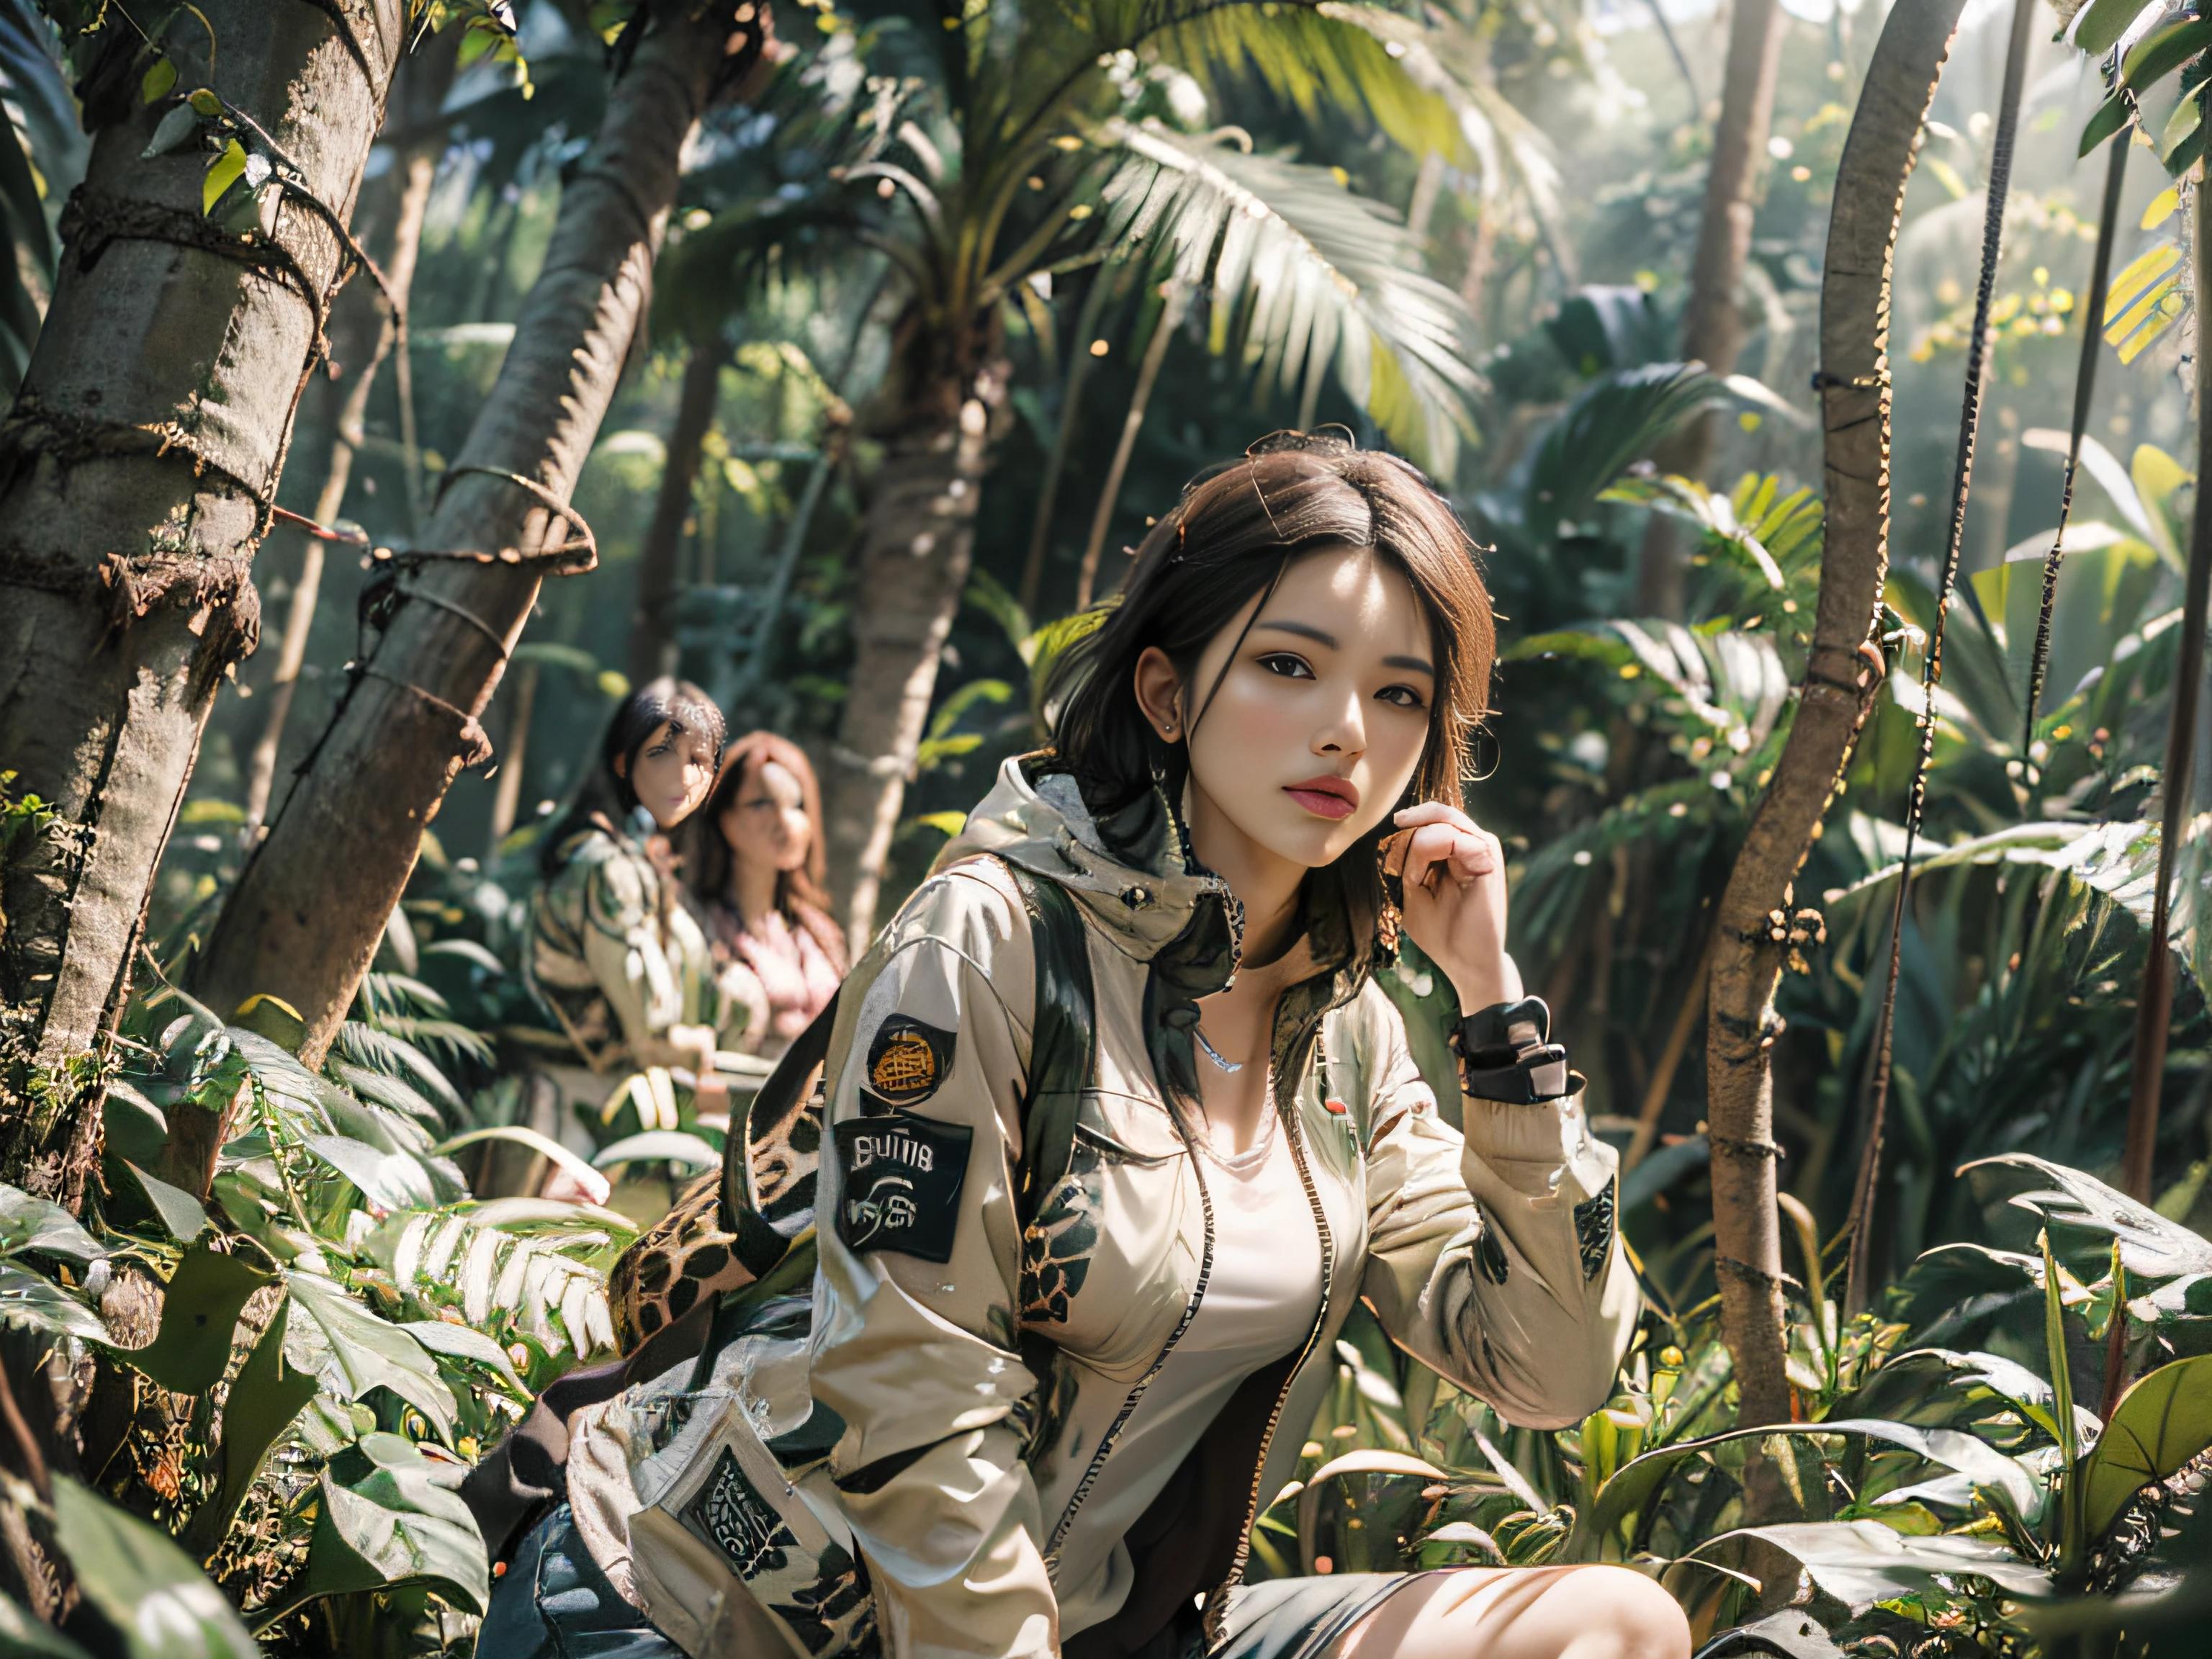 ((In the jungle of the dense forest:1.4))、(​masterpiece、top-quality)、(((landscapes)))、(((((Three female jungle adventurers wearing safari jackets:1.4)))))、Photo posed, Full Shot, (((Tire high-speed rotation)))、Shutter Speed：Continuous shooting、((The tree々Honda CBR1000RR galloping through jungle covered by)), The sun's rays are trees々Plug in a little bit from between、 (Jungle Adventure:1.3)、(Deep in the jungle:1.5)、((In the dense rainforest, The sun doesn't reach、Grass is growing without a road))、(The dim:1.3), (Forest Mountain Village:1.2)、(the wind、Sunnyday、bright clouds:1.3)、(motion-blur)、super detail, high details, high quality, award winning, best quality, highres, 1080P, HD, 4K, 8k, 16k, Wallpapers of,

Crazy Color, Rembrandt lighting, Arnold Rendering, Photorealistic with 8K resolution, Photorealsitic, photographrealistic, Rich colors, Peach Fuzz, award winning photo by lee jeffries, nikon d850 film stock photograph, kodak portra 400 camera f1.6 lens, Extremely detailed, amazing, Fine detail, ultra realistic lifelike textures, Dramatic Angle, unrealengine, Trending on ArtStation, cinestill 800 tungsten, Raw photo,